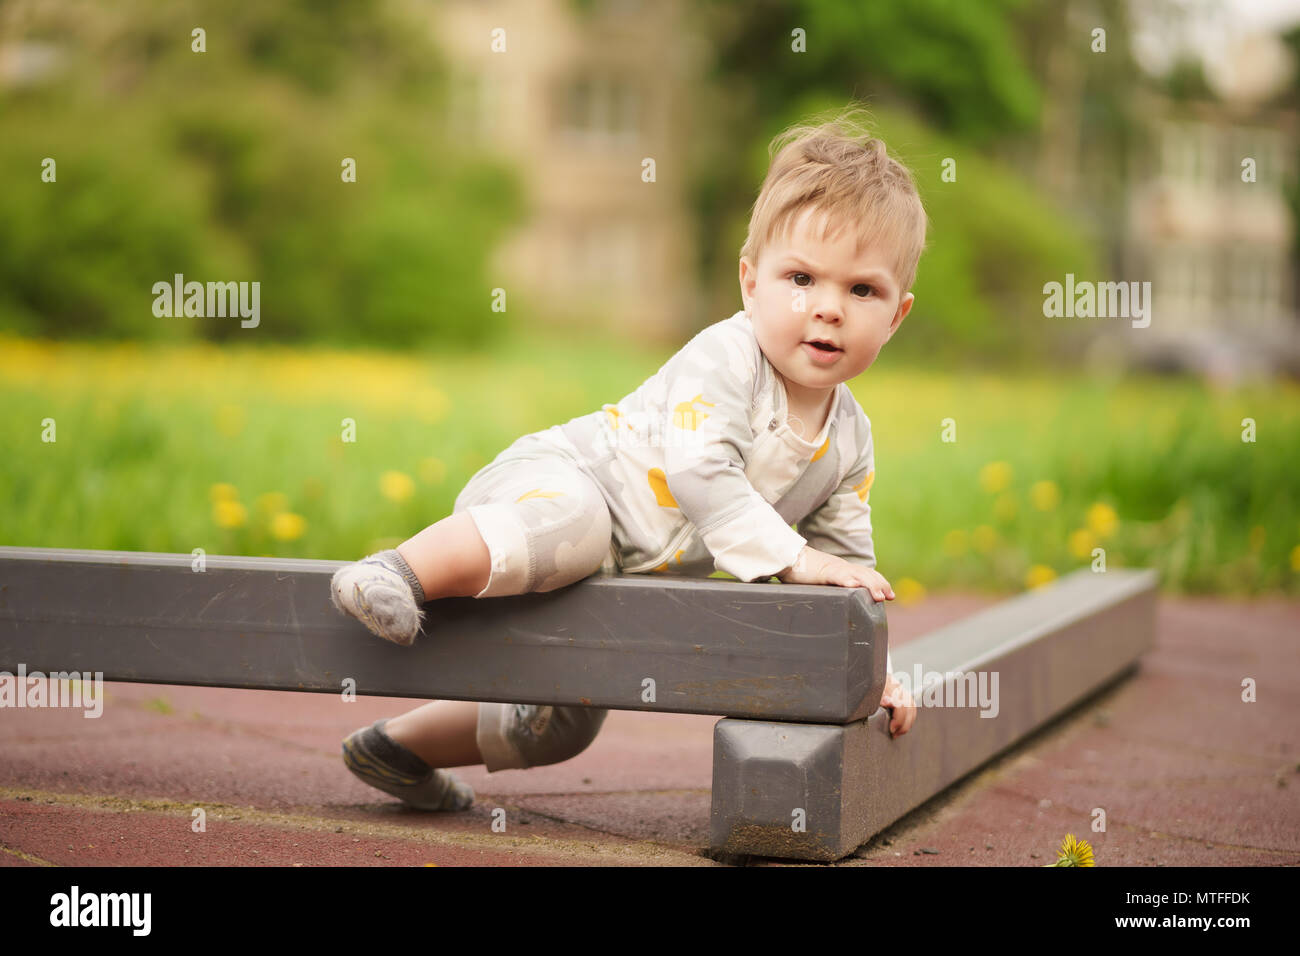 Concept: family values. Portrait of adorable innocent funny brown-eyed baby playing at outdoor playground. Stock Photo